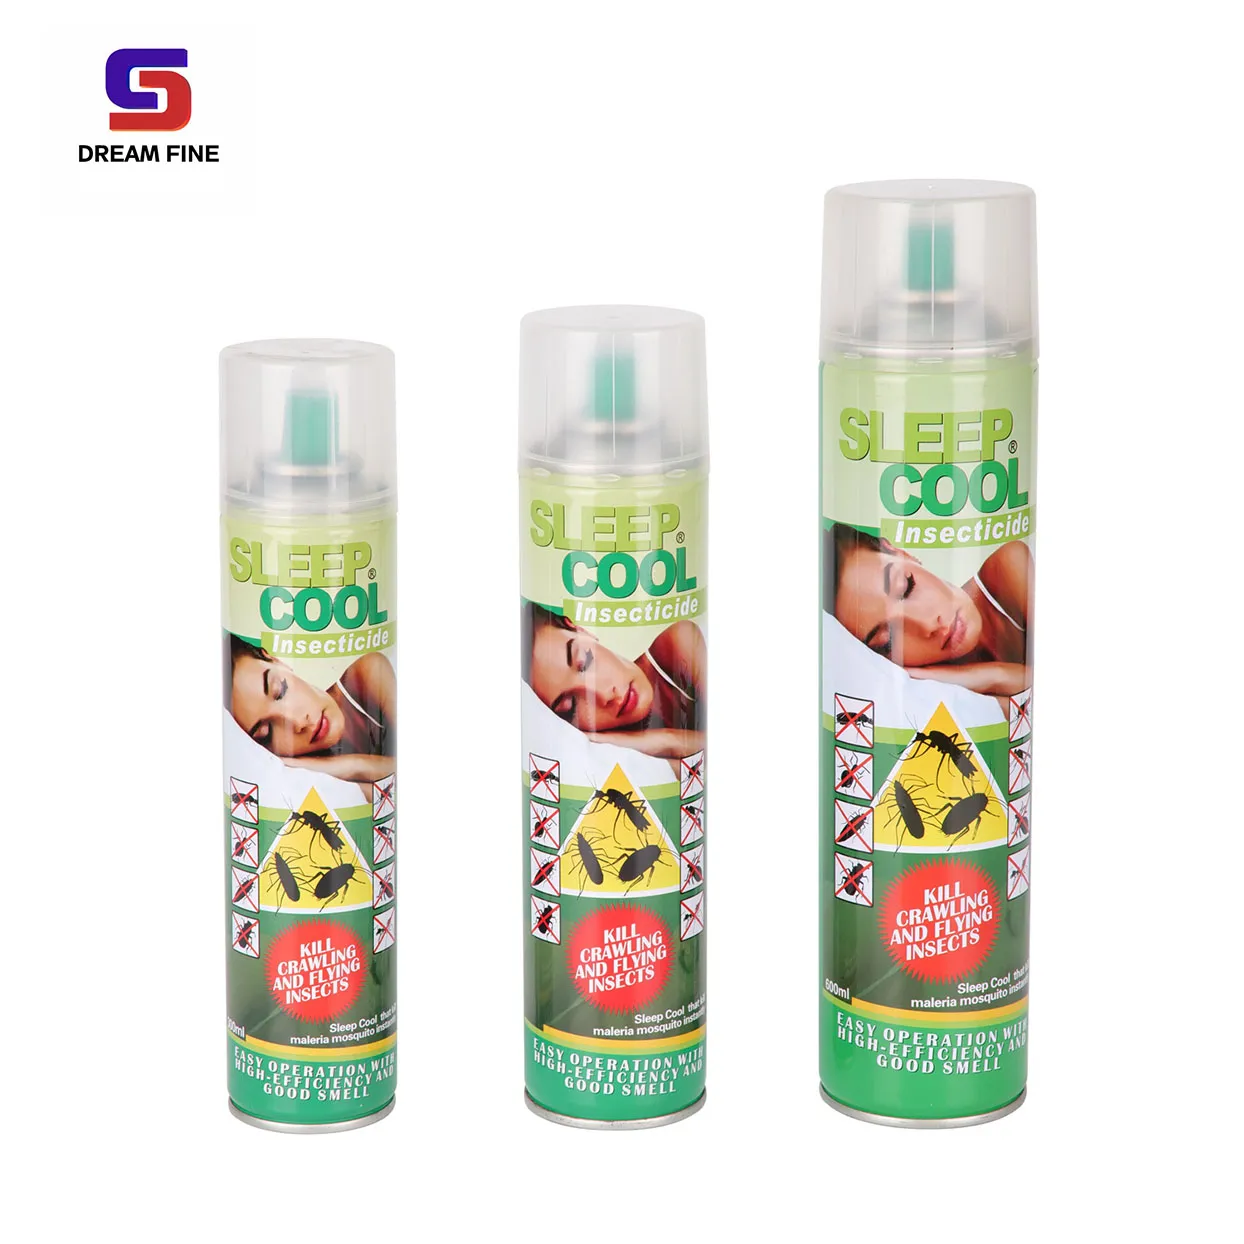 SLEEP COOL – Indoor Raid Effective Anti Fly and Crawl Insect Killer Aerosol Spray Insecticide